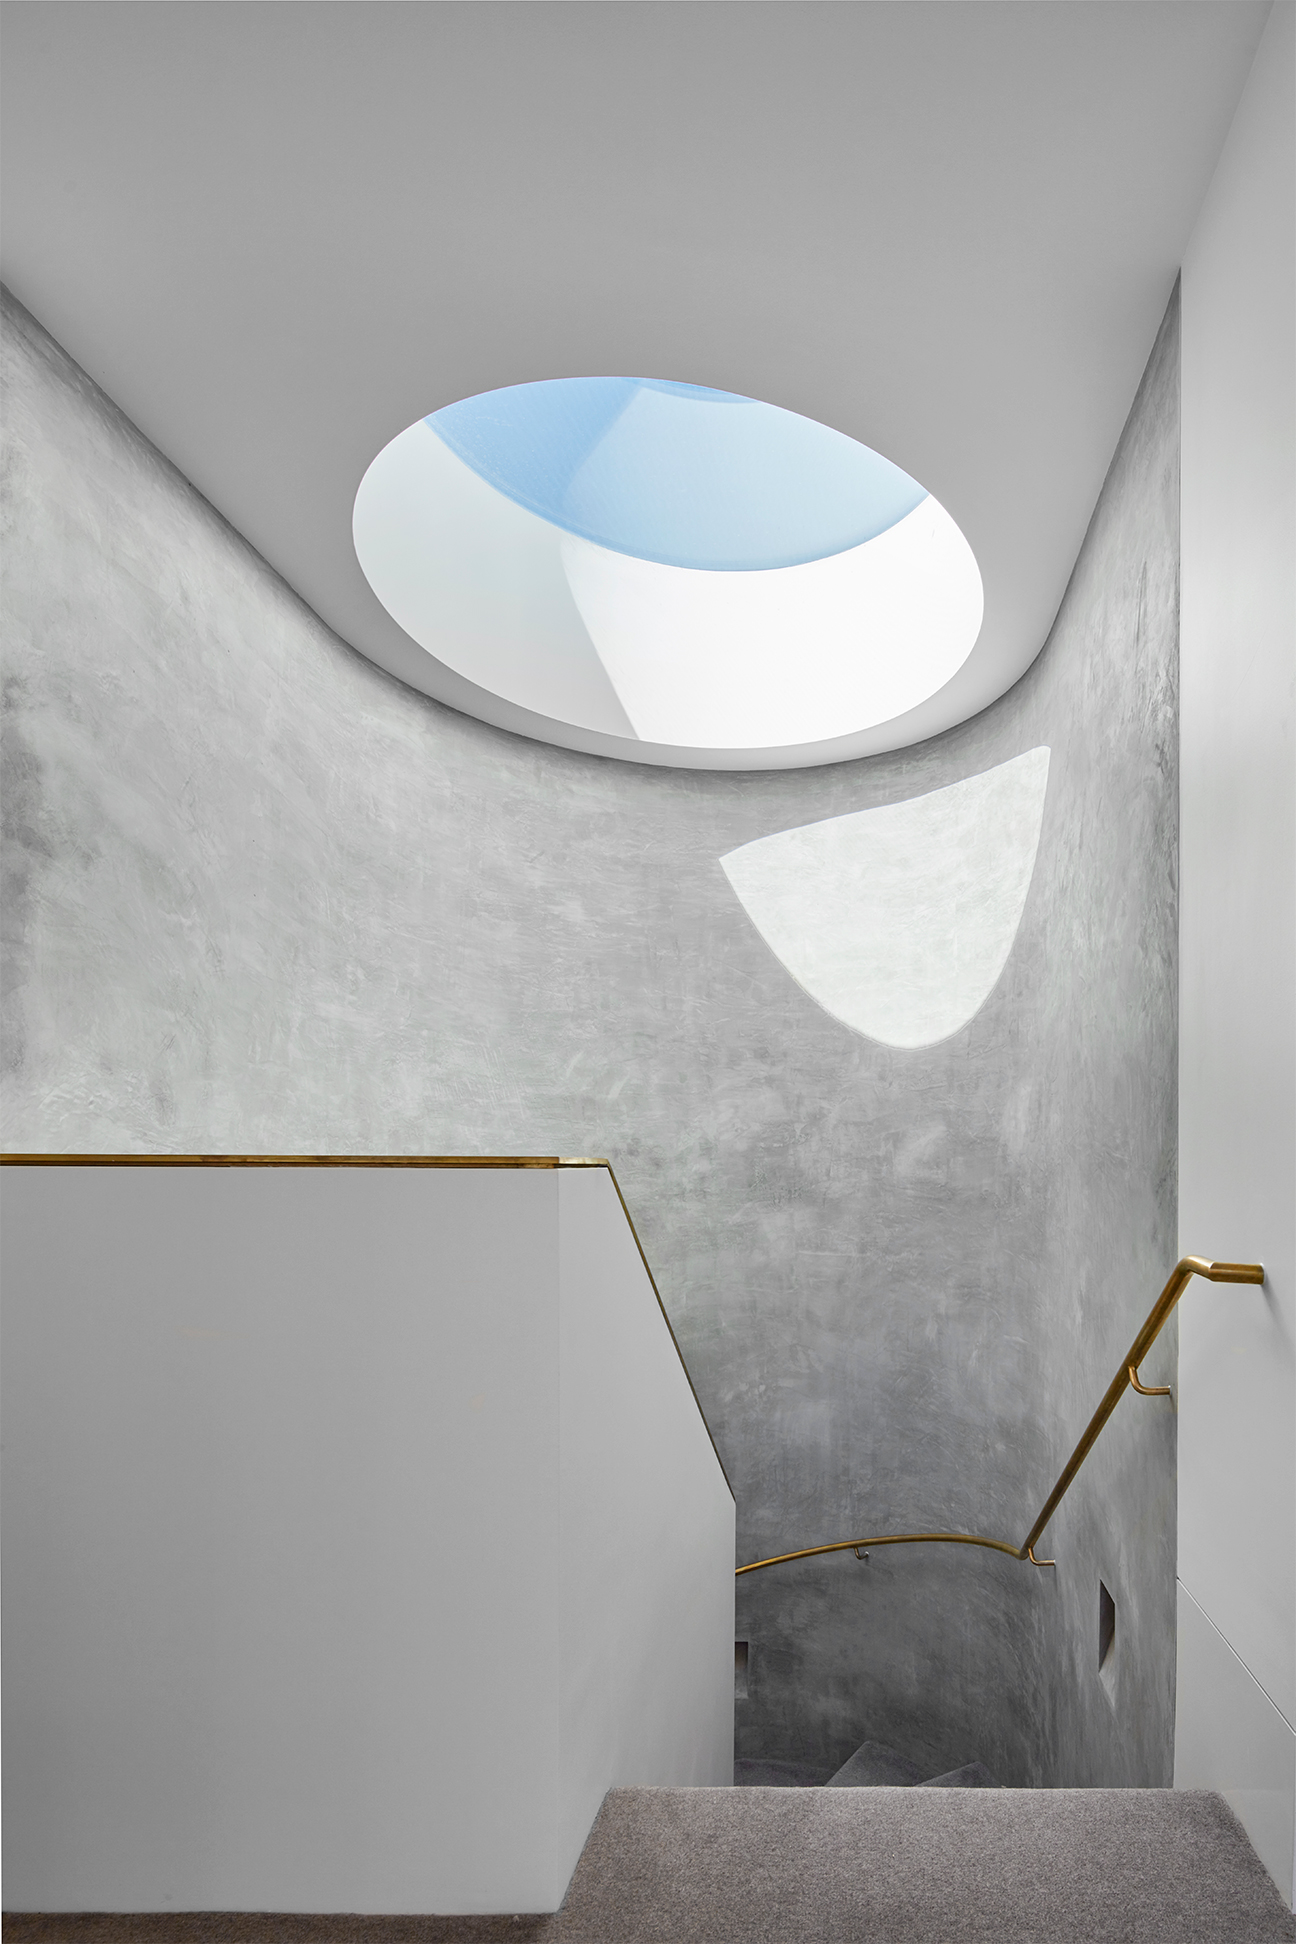 Staircase with round skylight